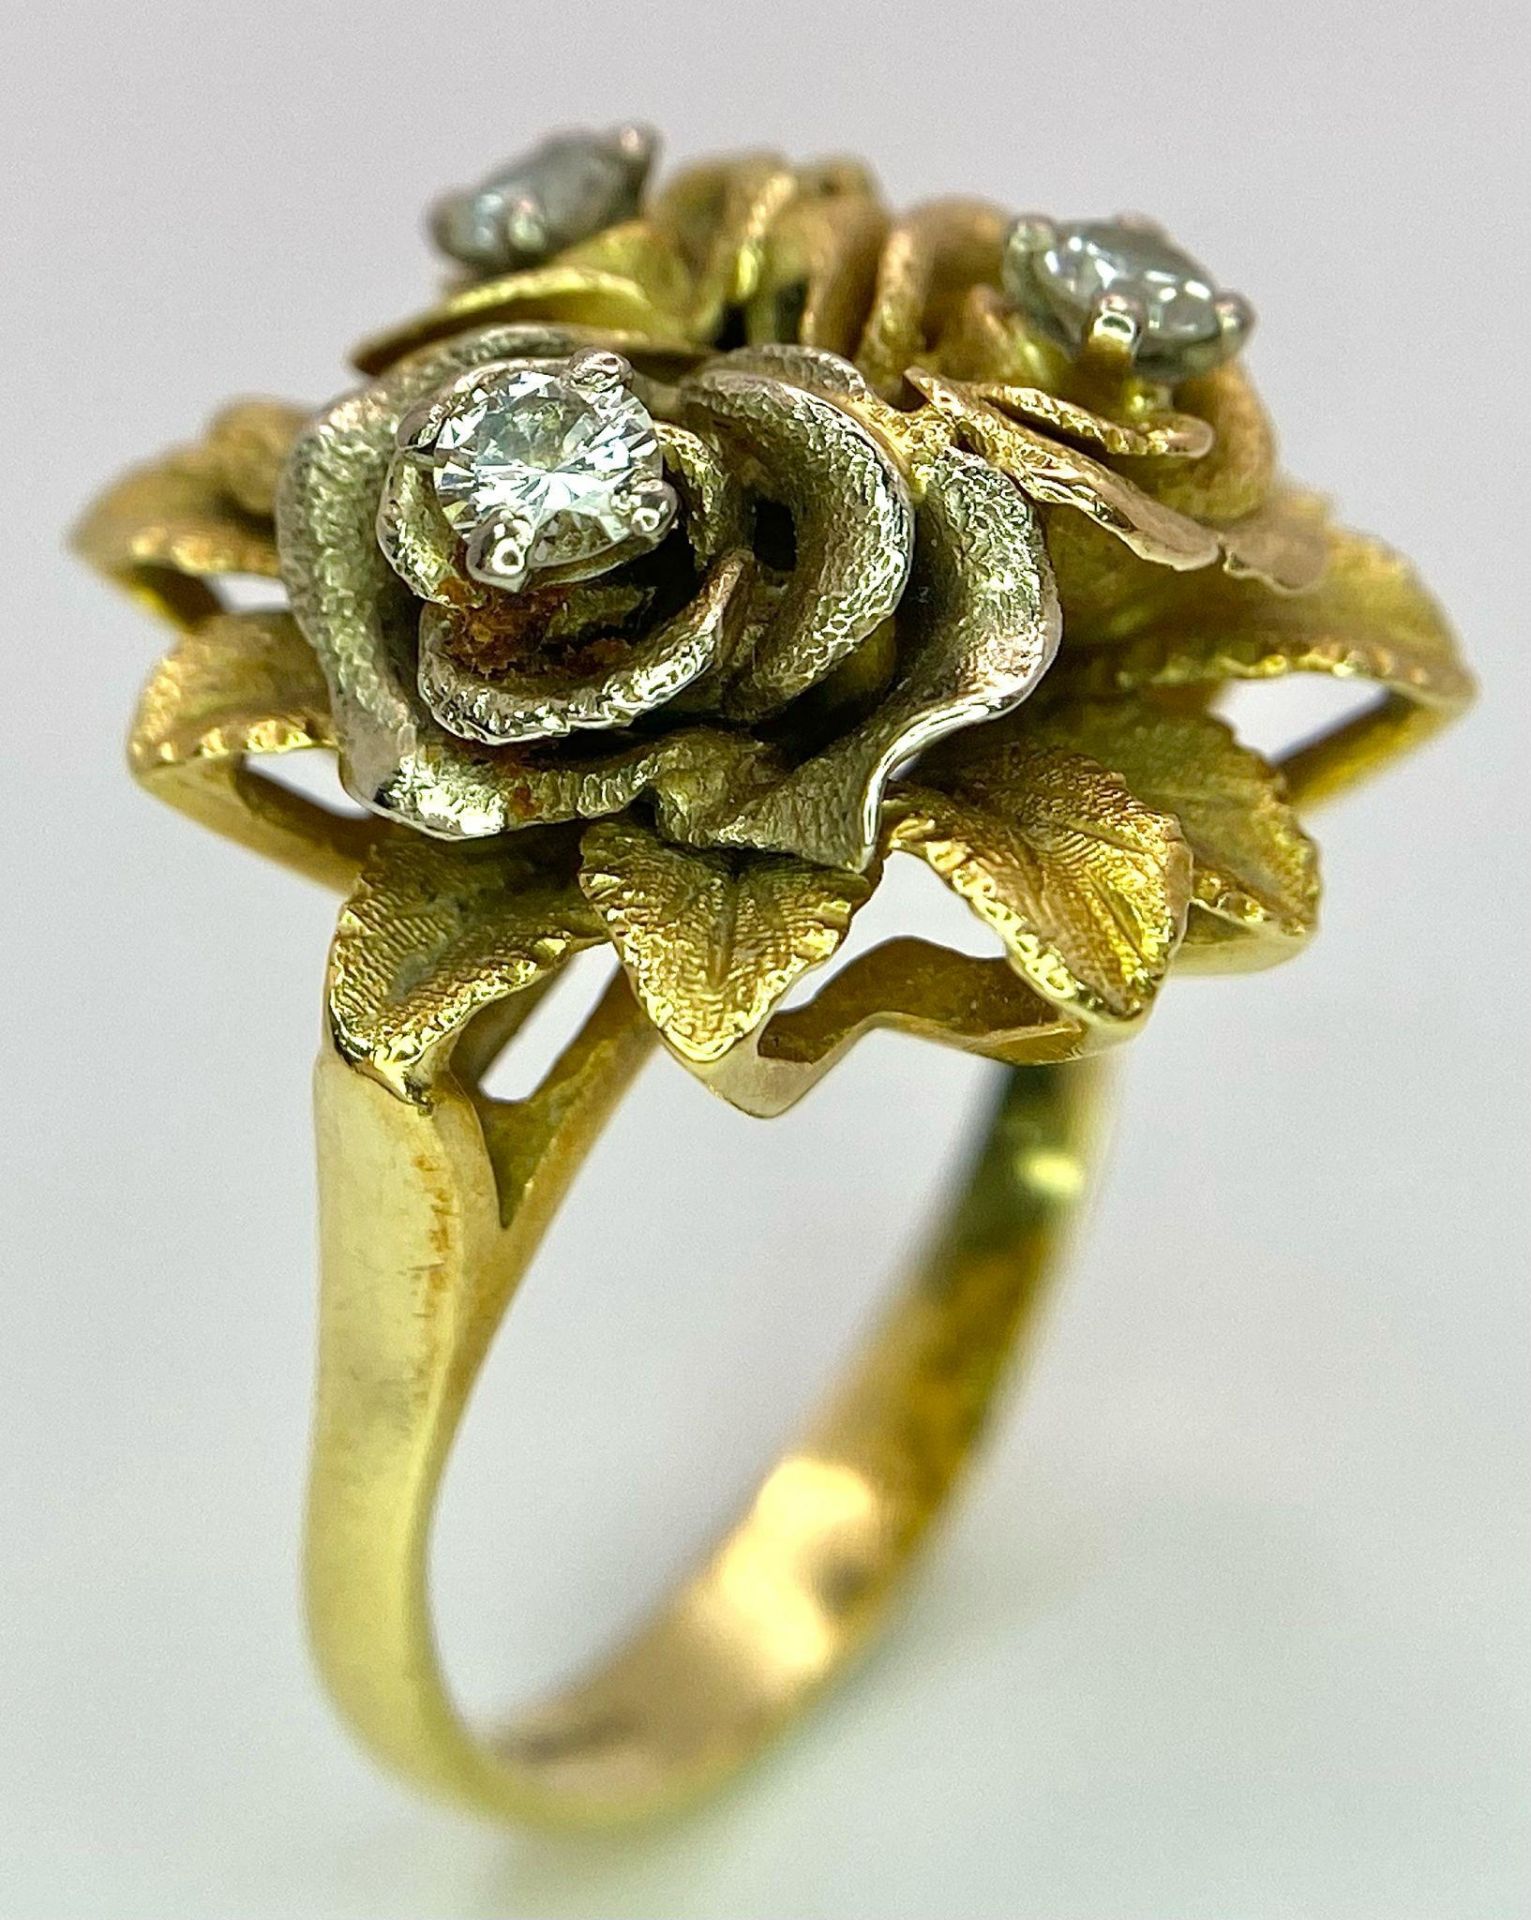 An 18K Yellow Gold and Diamond Floral Design Ring. A rich cluster of golden petals give sanctuary to - Image 6 of 10